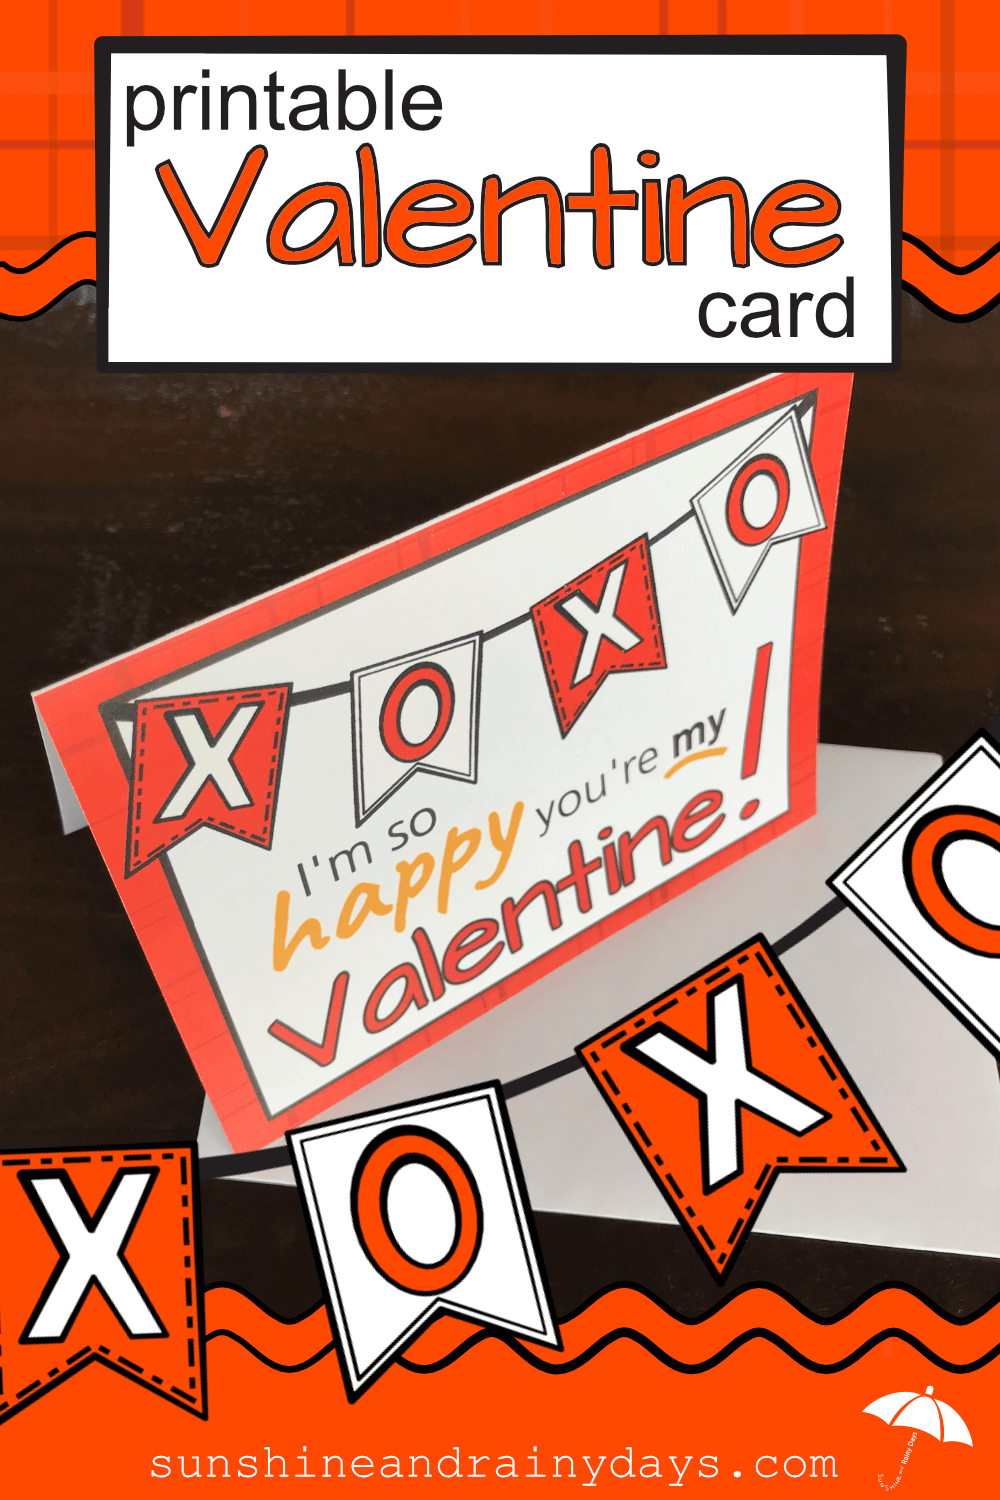 With this Printable Valentine Card, you won't have a reason to spend time and money going to the card store. NOPE! Save your money for a lovely Valentine's Day gift instead! Printable Valentine Cards | Valentine Card To Print | Valentine Printables | #Valentines #ValentinesDay #ValentinePrintables #SARD